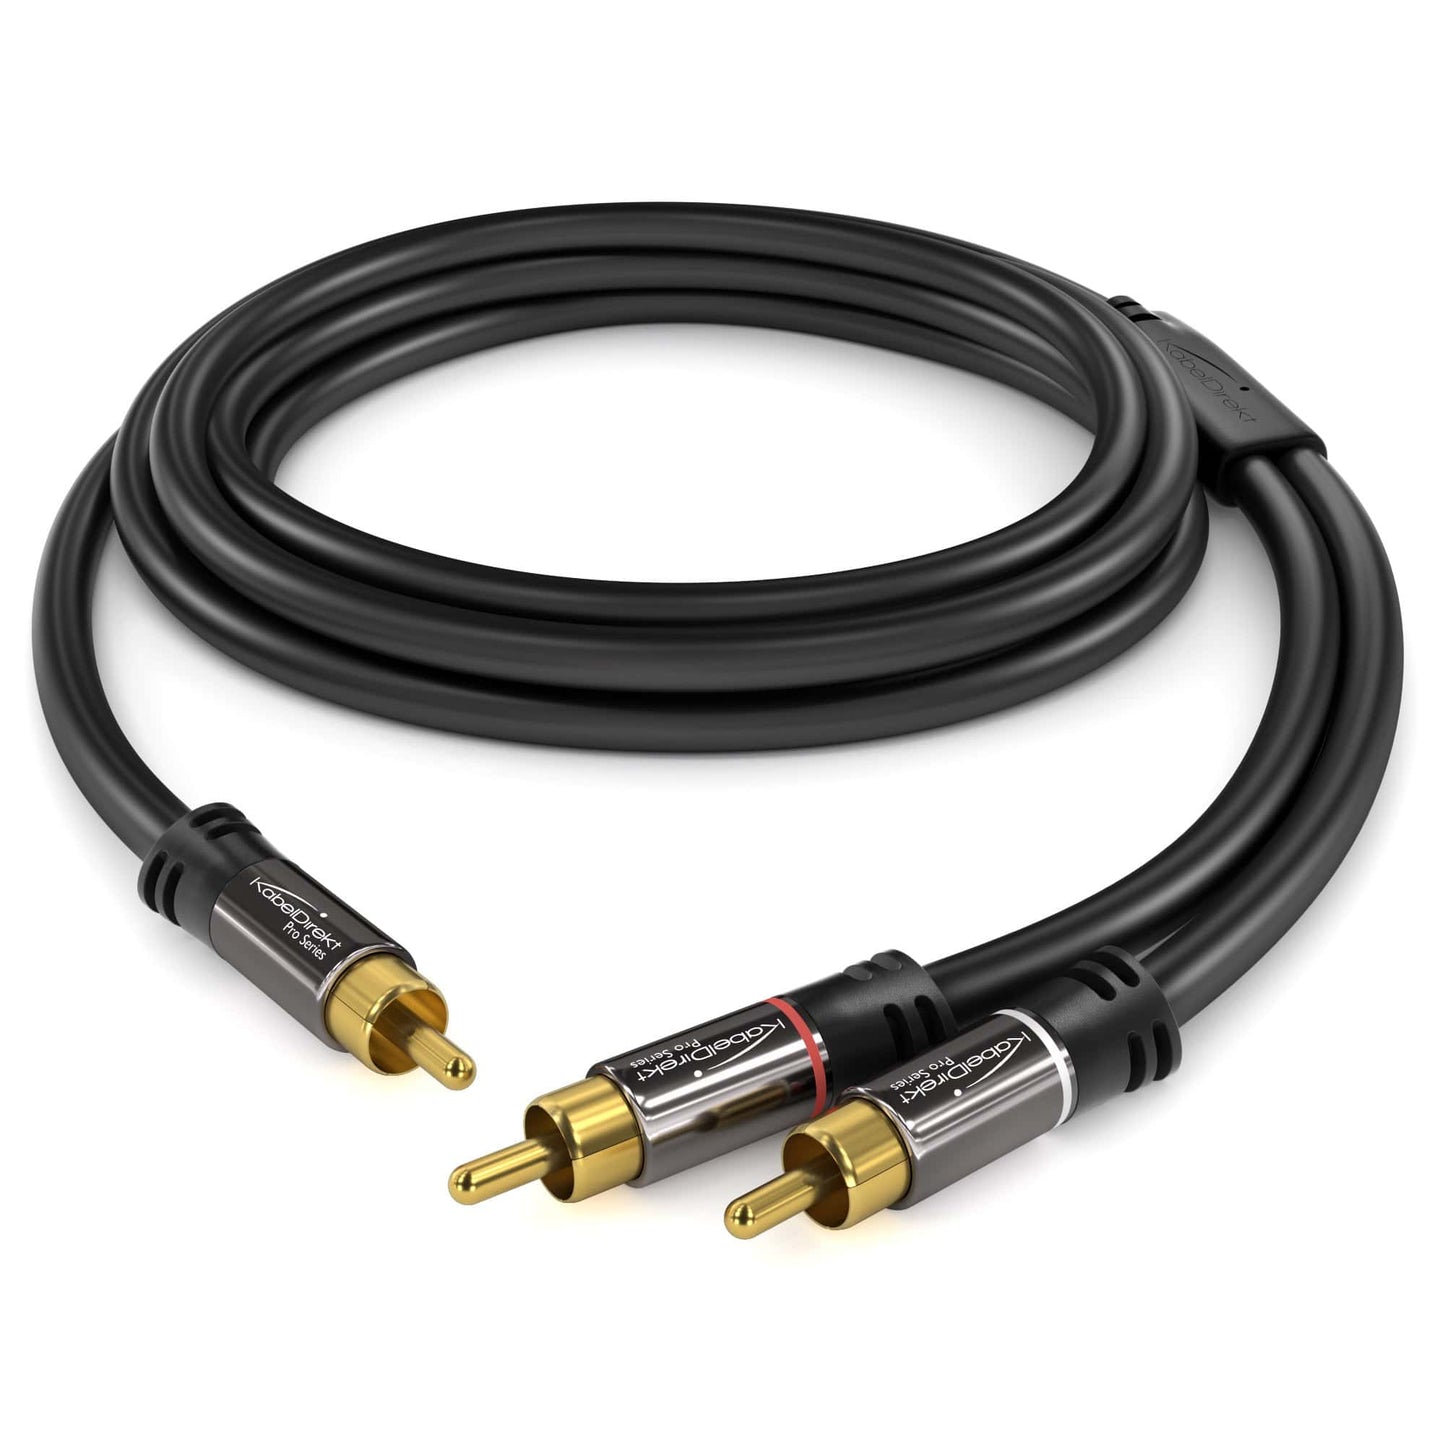 2 to 2 RCA Y adapter cable, stereo audio cable, Cinch/phono male to male plugs, analogue/digital